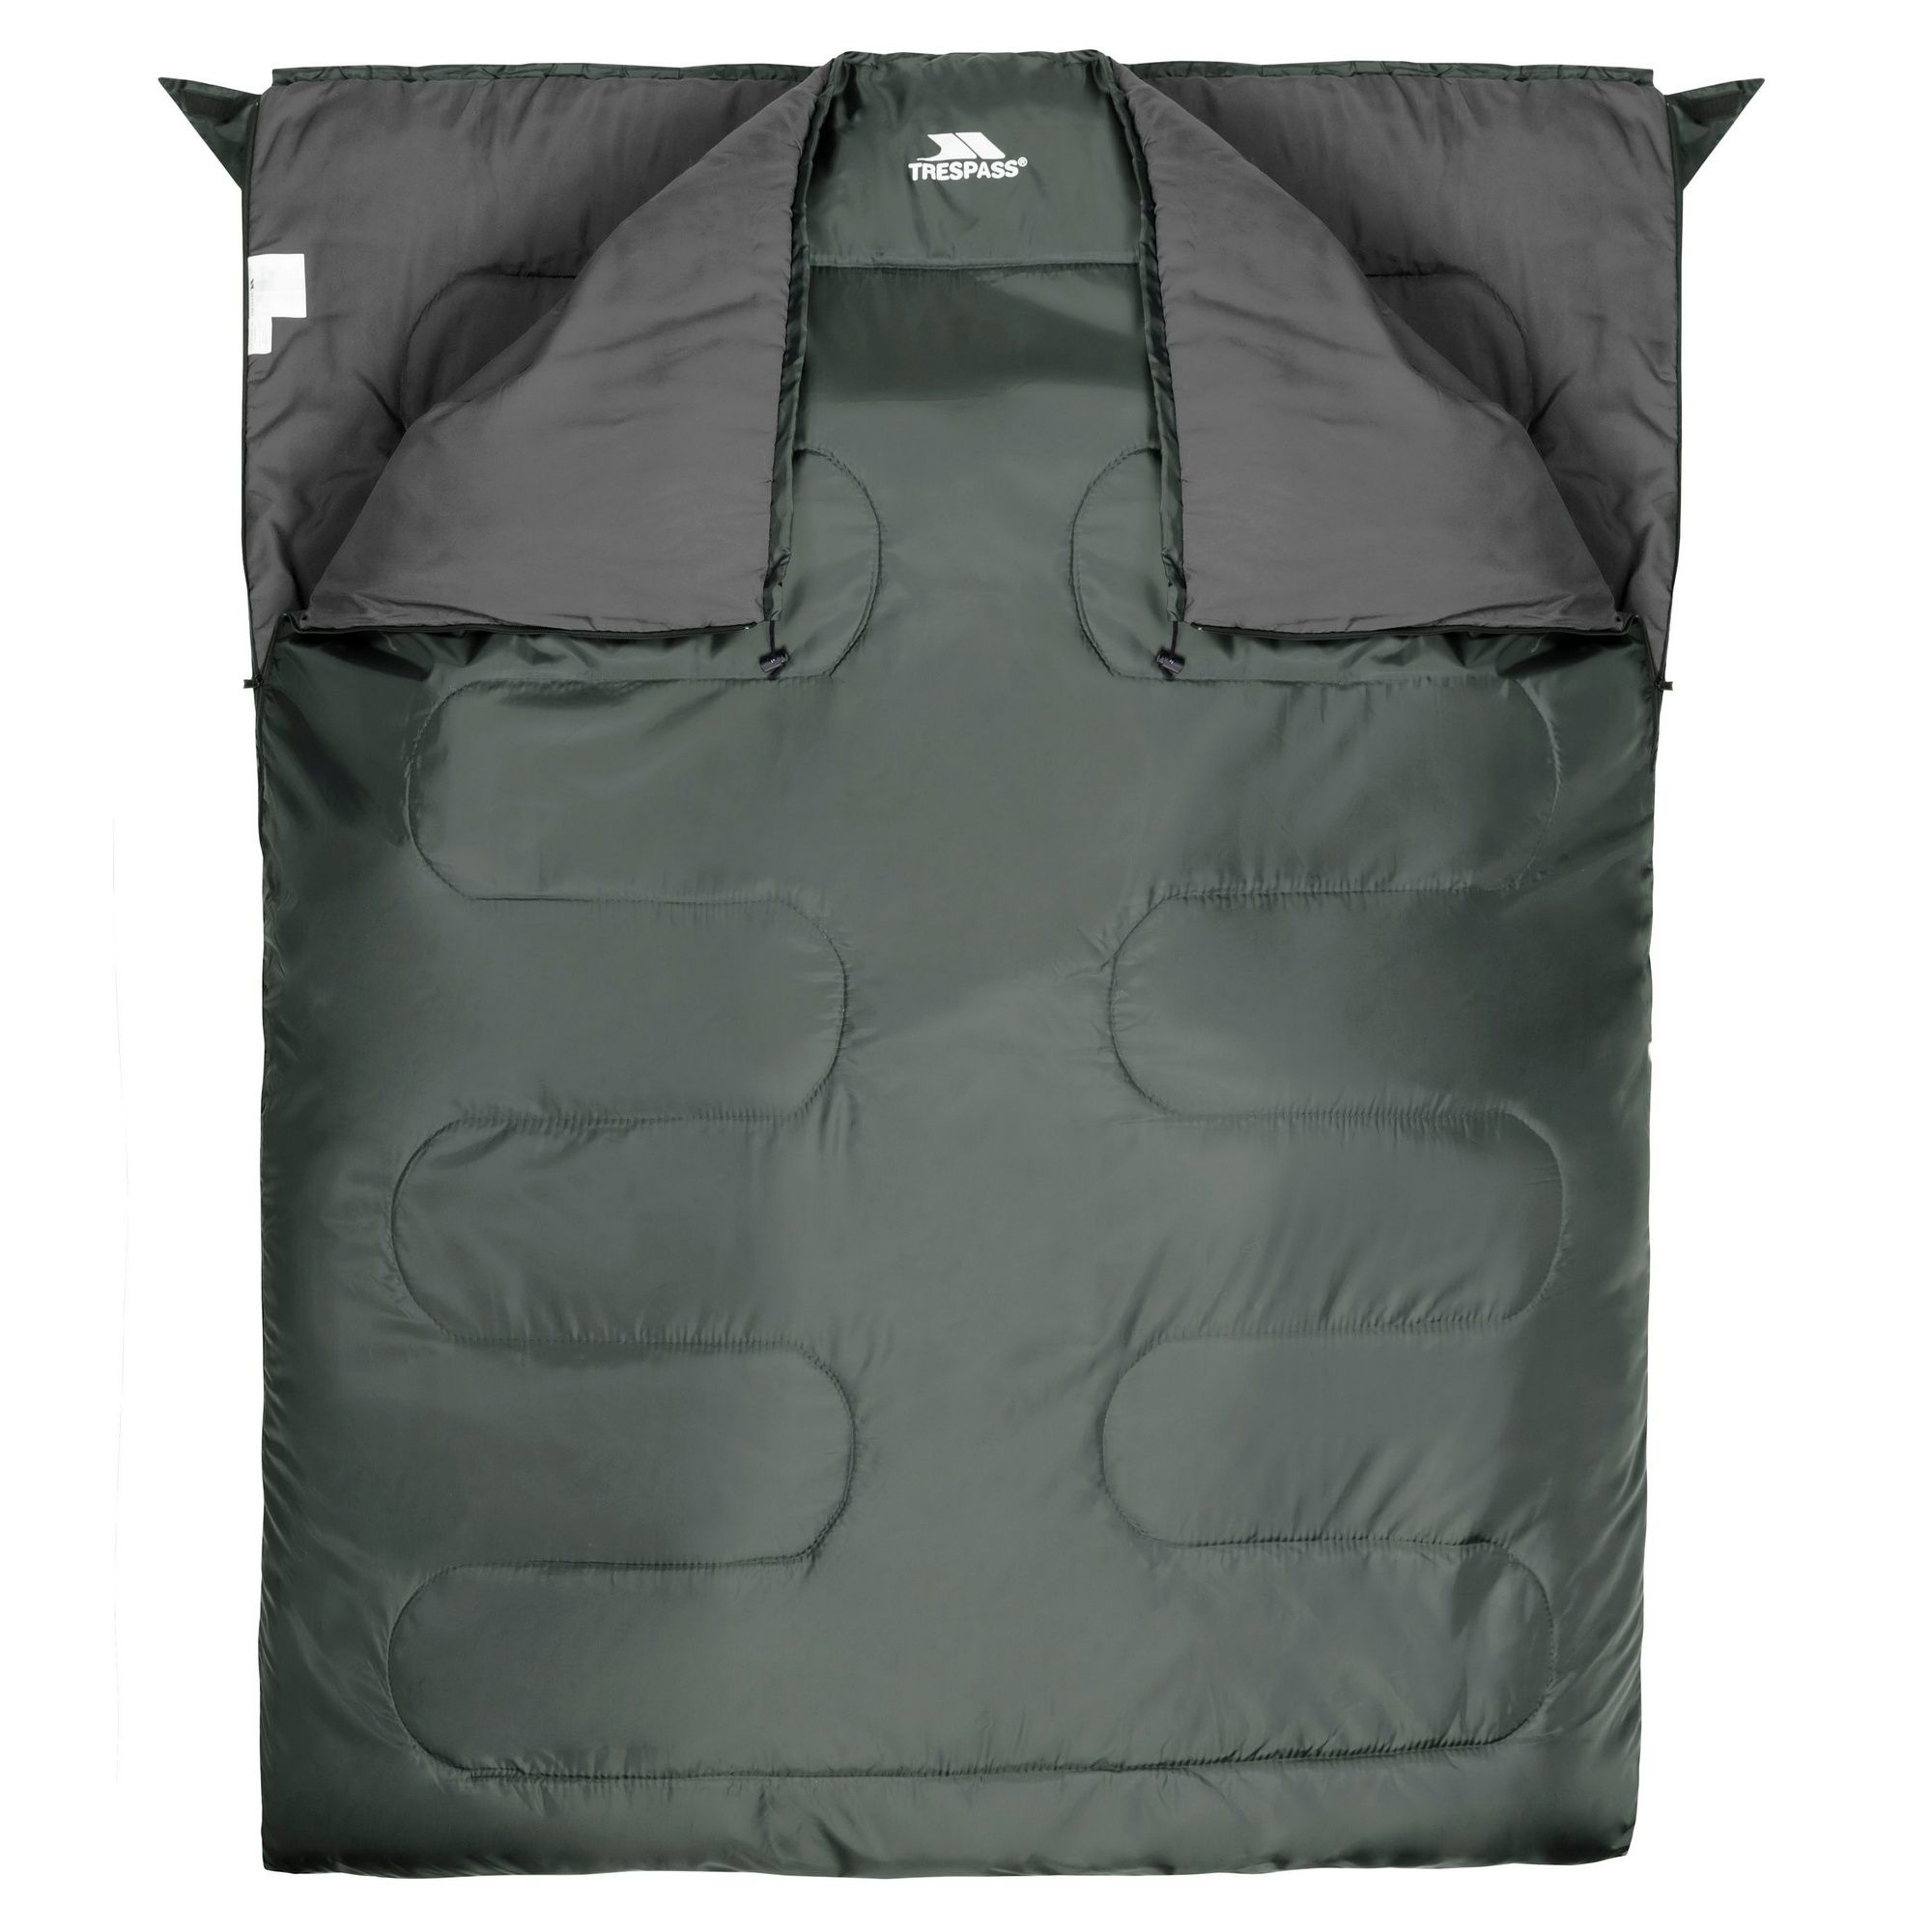 3 Season Double Sleeping Bag. 180cm x 140cm. Shell: 100% Polyester, Water repellent, Lining: 65% Polyester/35% Cotton, Filling: 100% Polyester. Upper limit: +22C, comfort: +13C, lower limit: -3C.